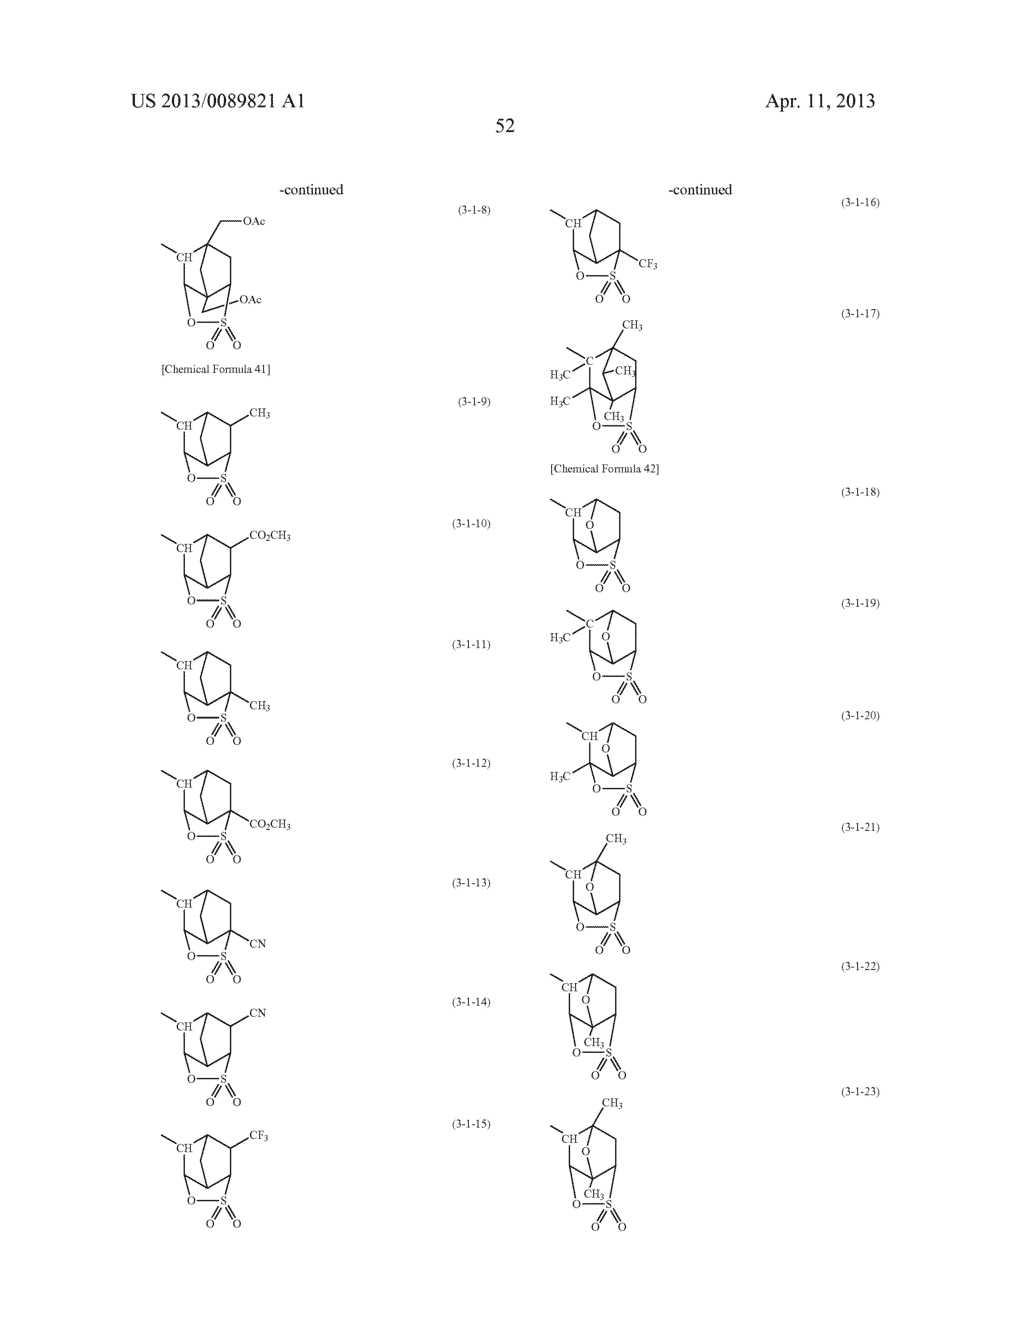 RESIST PATTERN FORMATION METHOD AND PATTERN MINIATURIZATION AGENT - diagram, schematic, and image 53